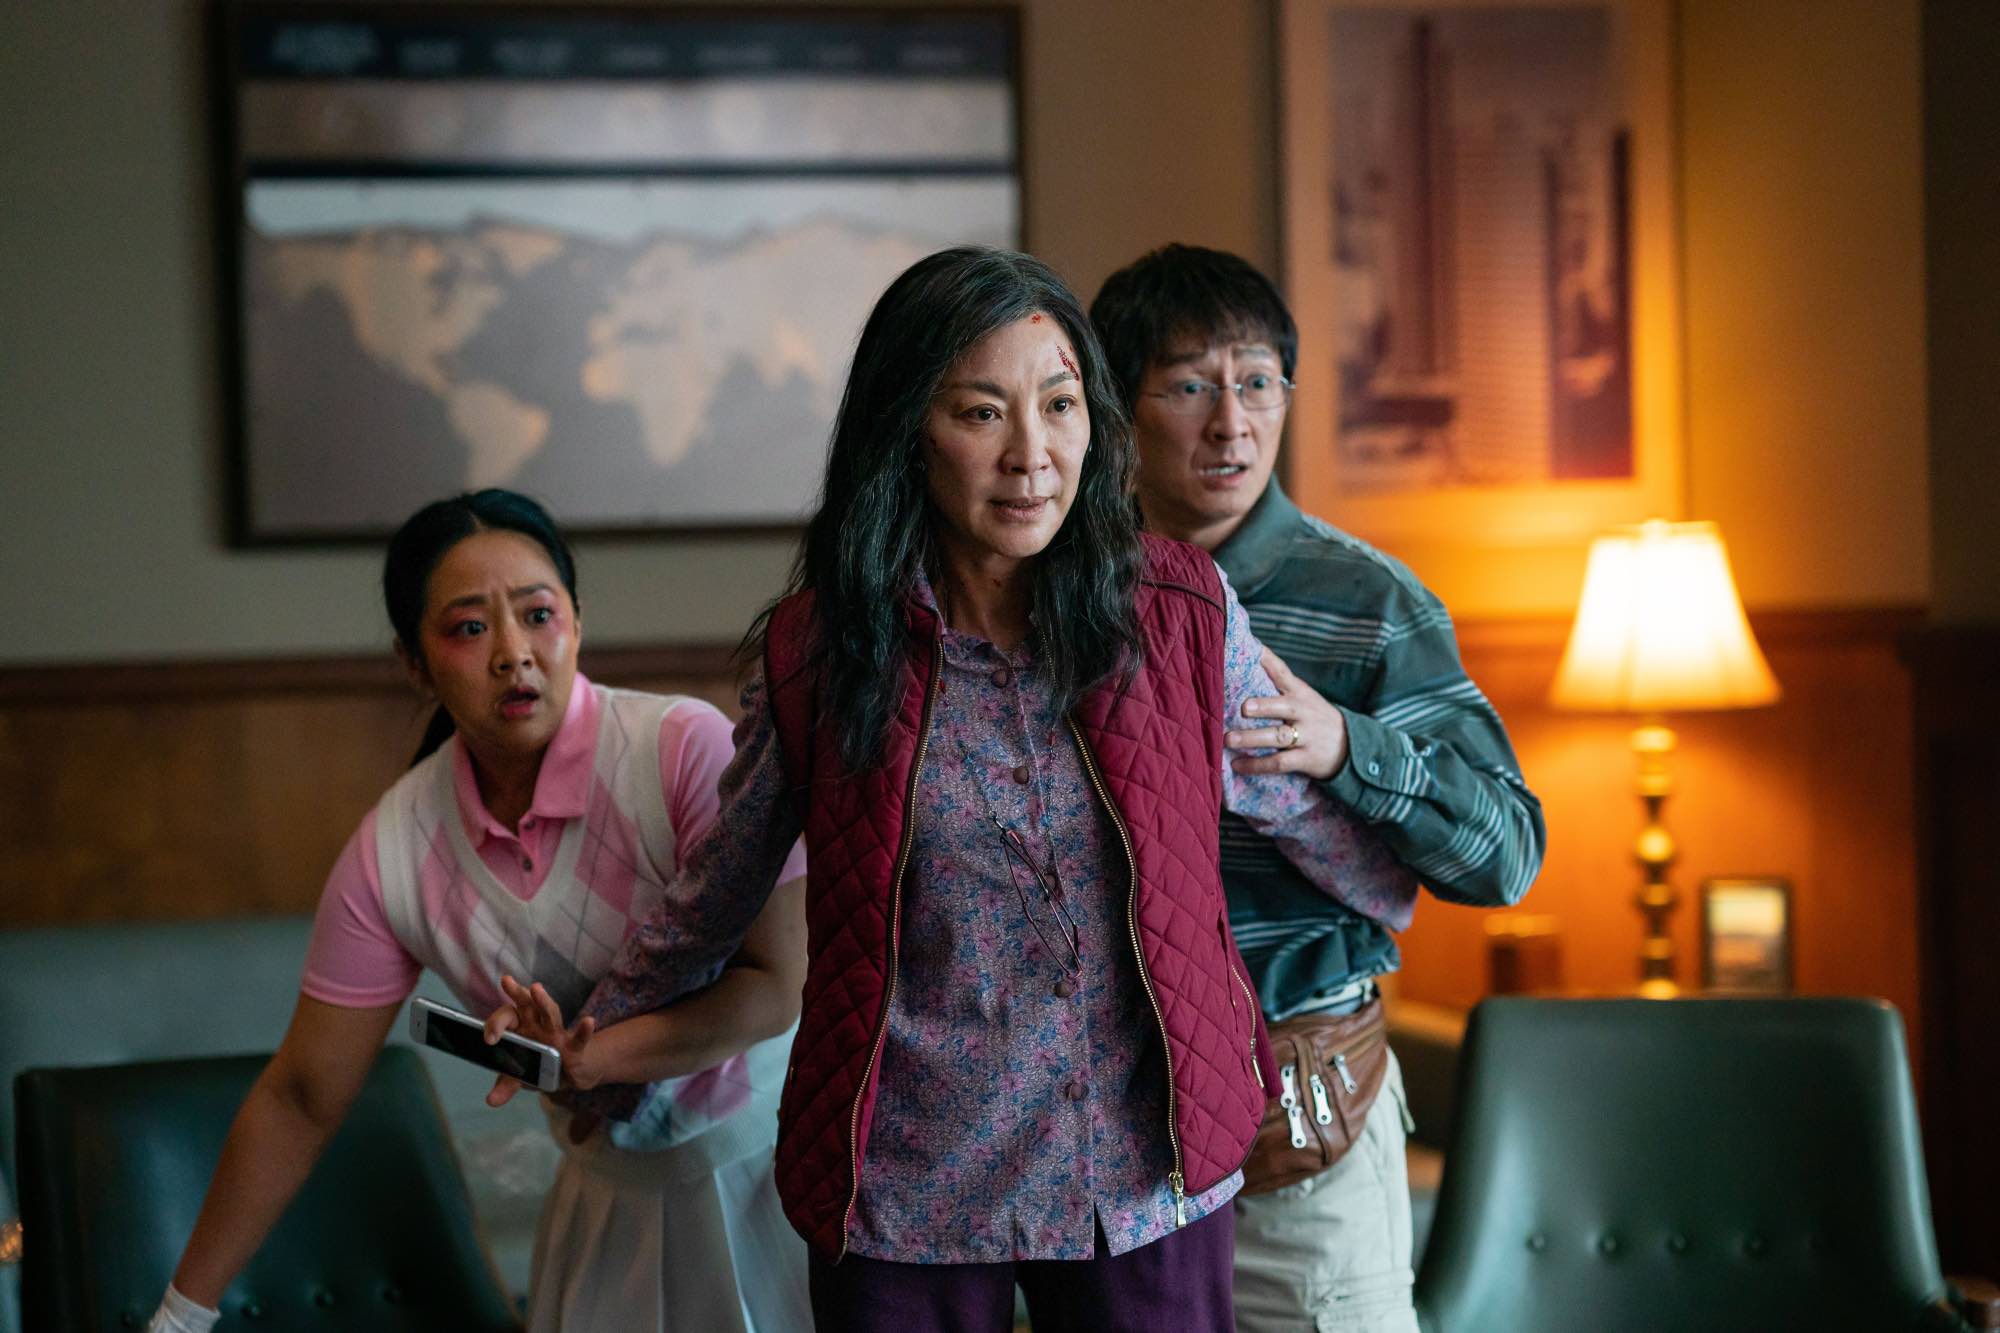 Oscars 2023 Best Picture nominee 'Everything Everywhere All at Once' Stephanie Hsu as Joy Wang, Michelle Yeoh as Evelyn Wang, and Ke Huy Quan as Waymond Wang. Evelyn is standing in front of Joy and Waymond, with them looking worried.